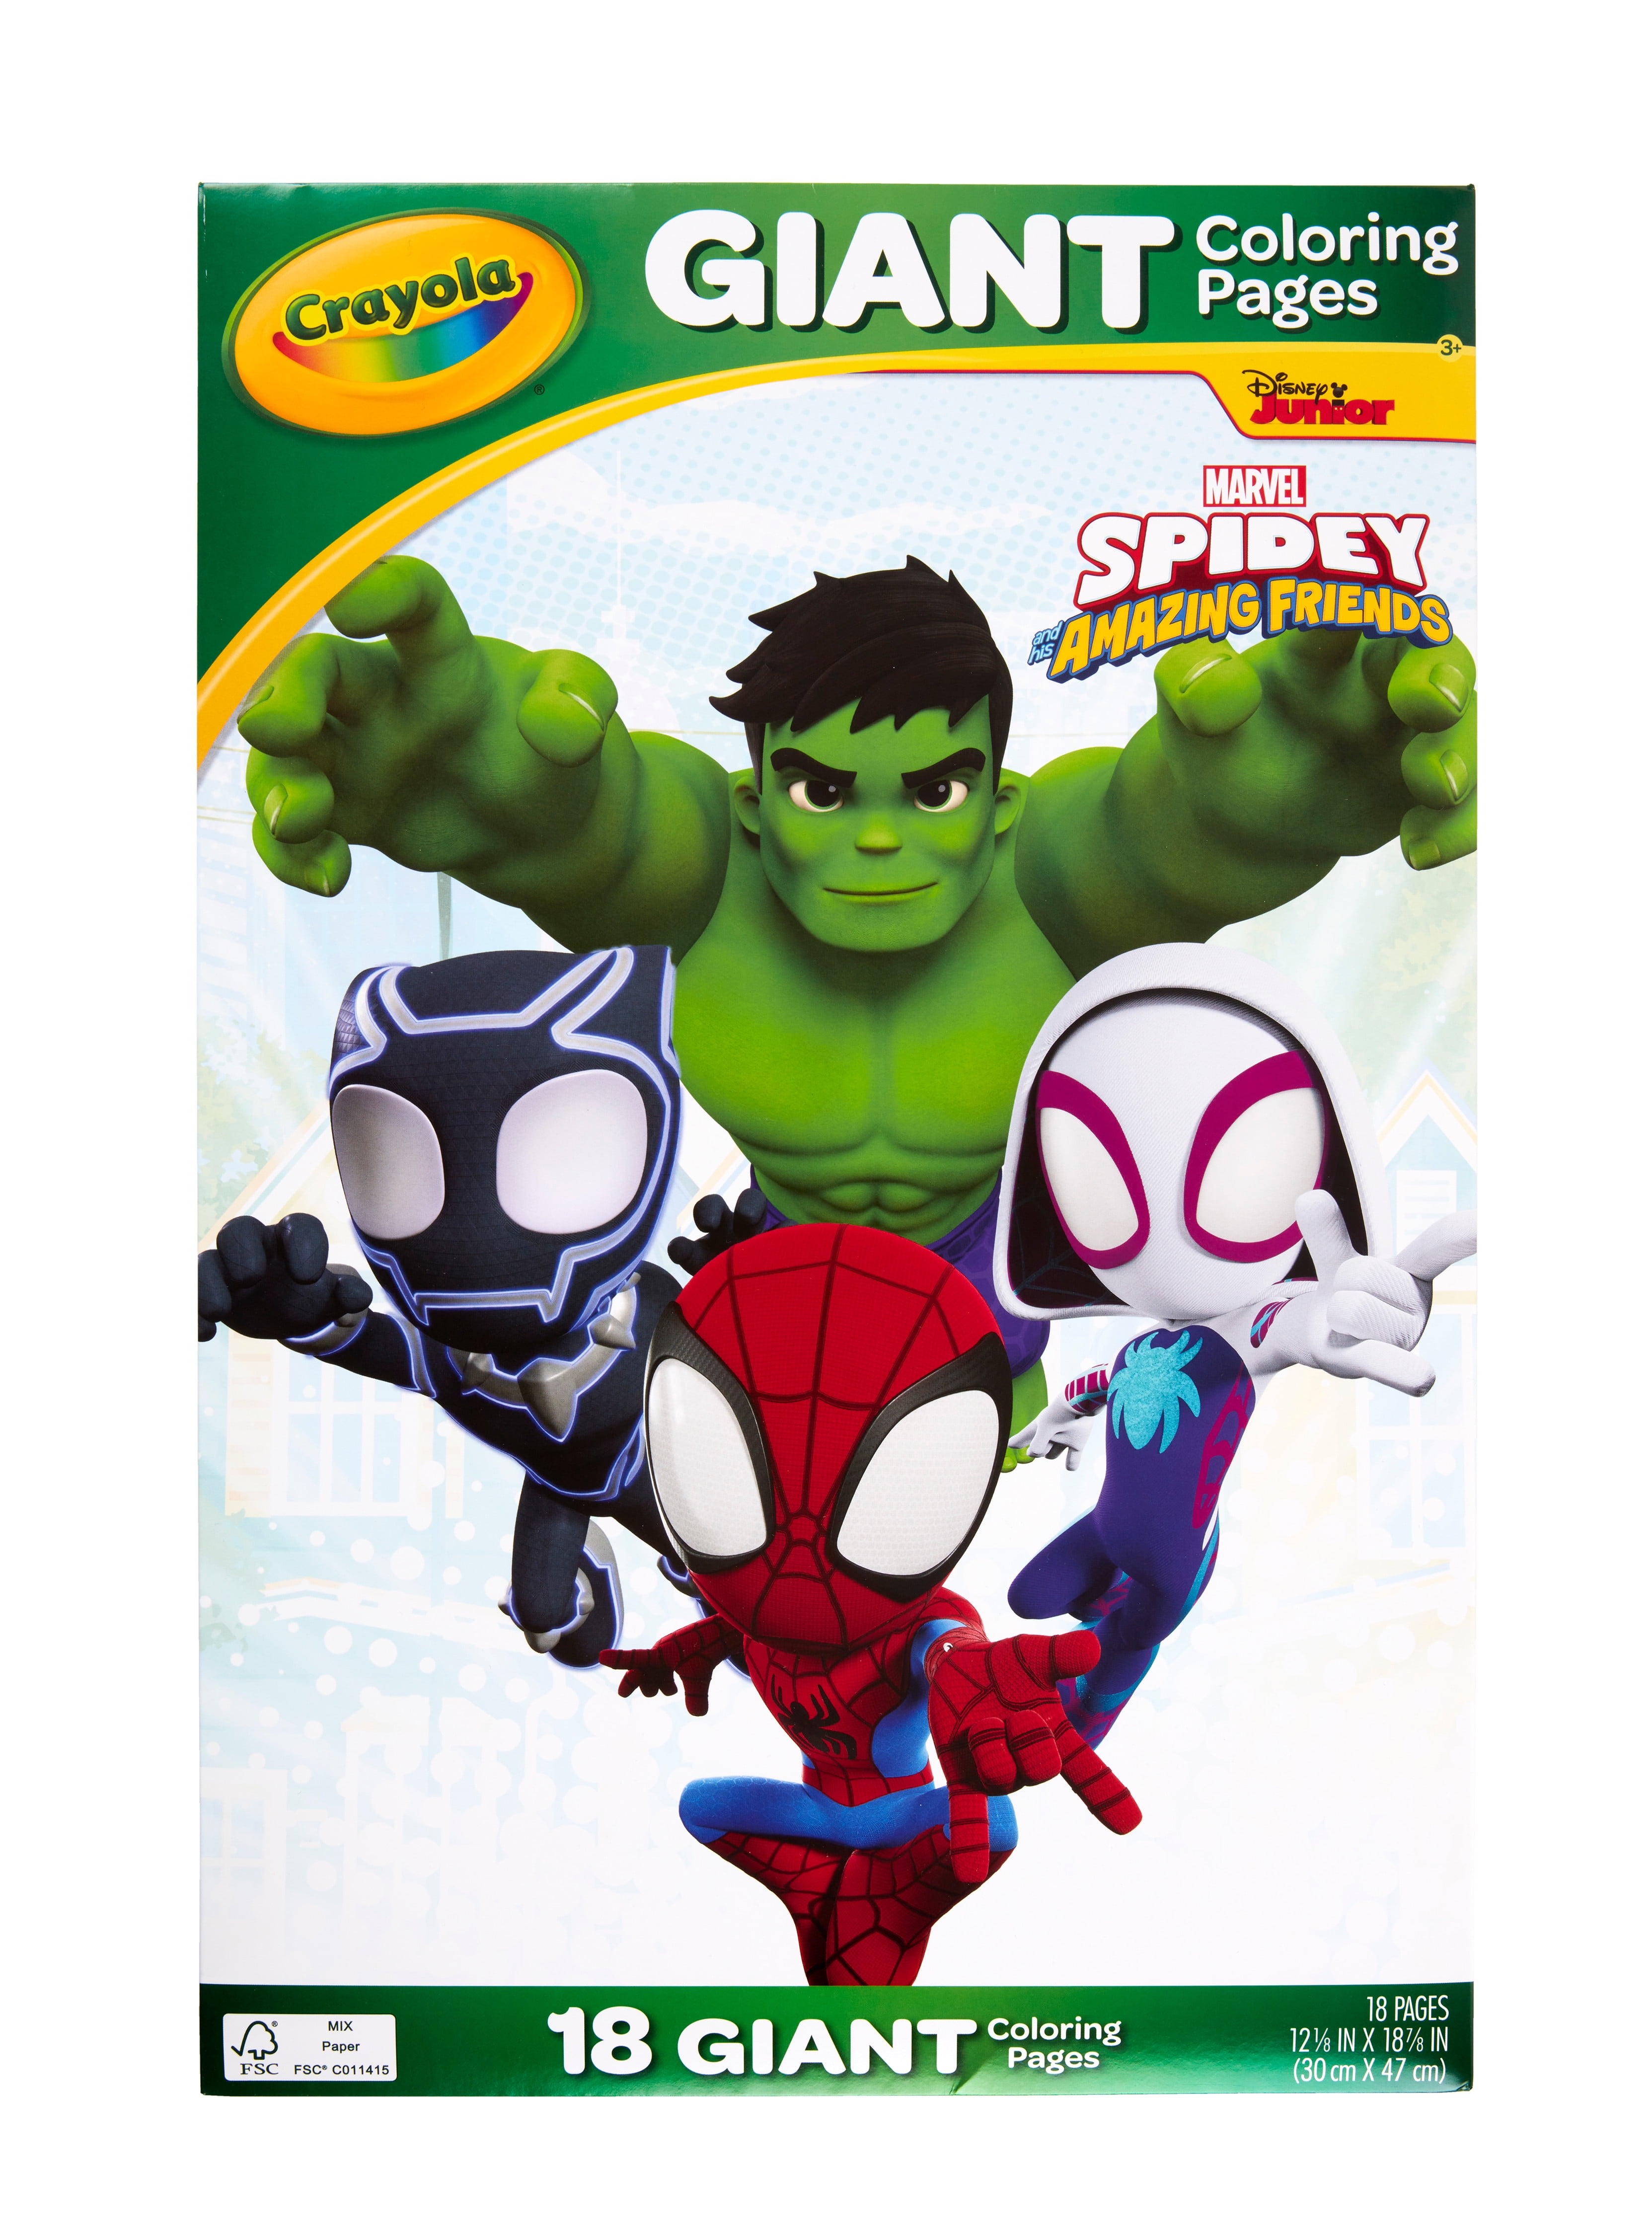 Crayola spidey his amazing friends giant coloring pages